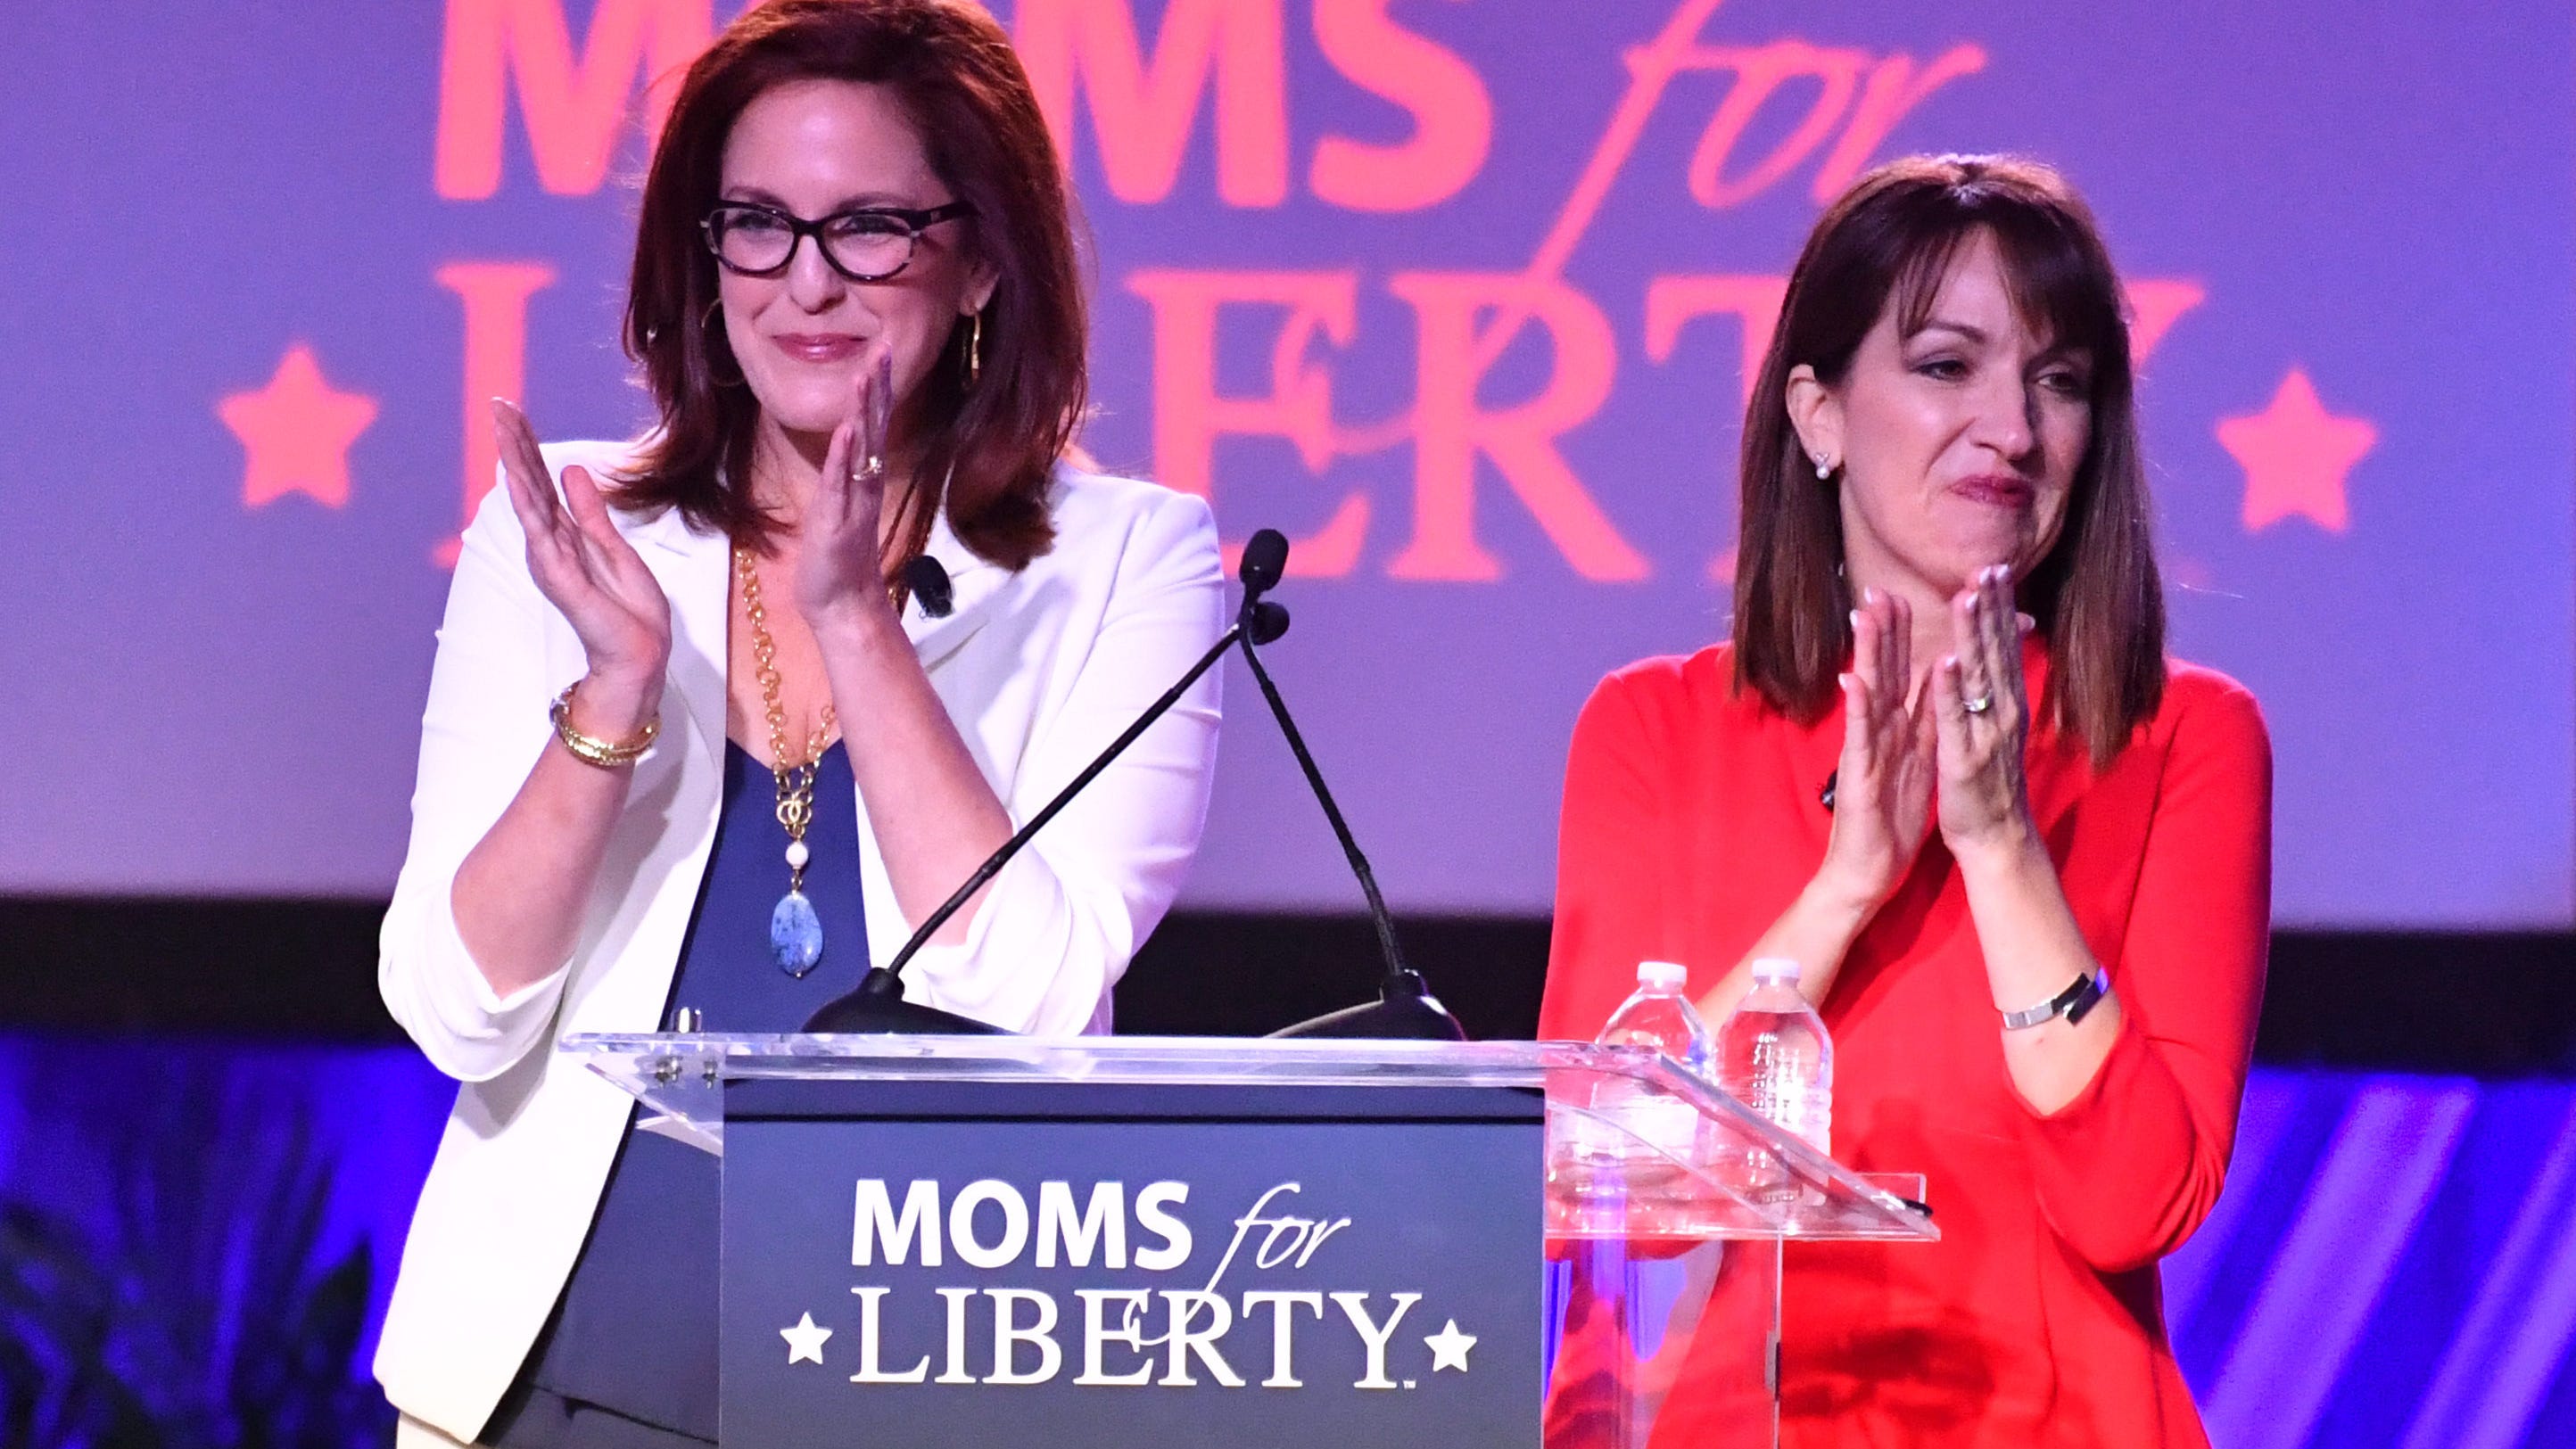 Moms for Liberty summit in Tampa, Florida reveals political strategy